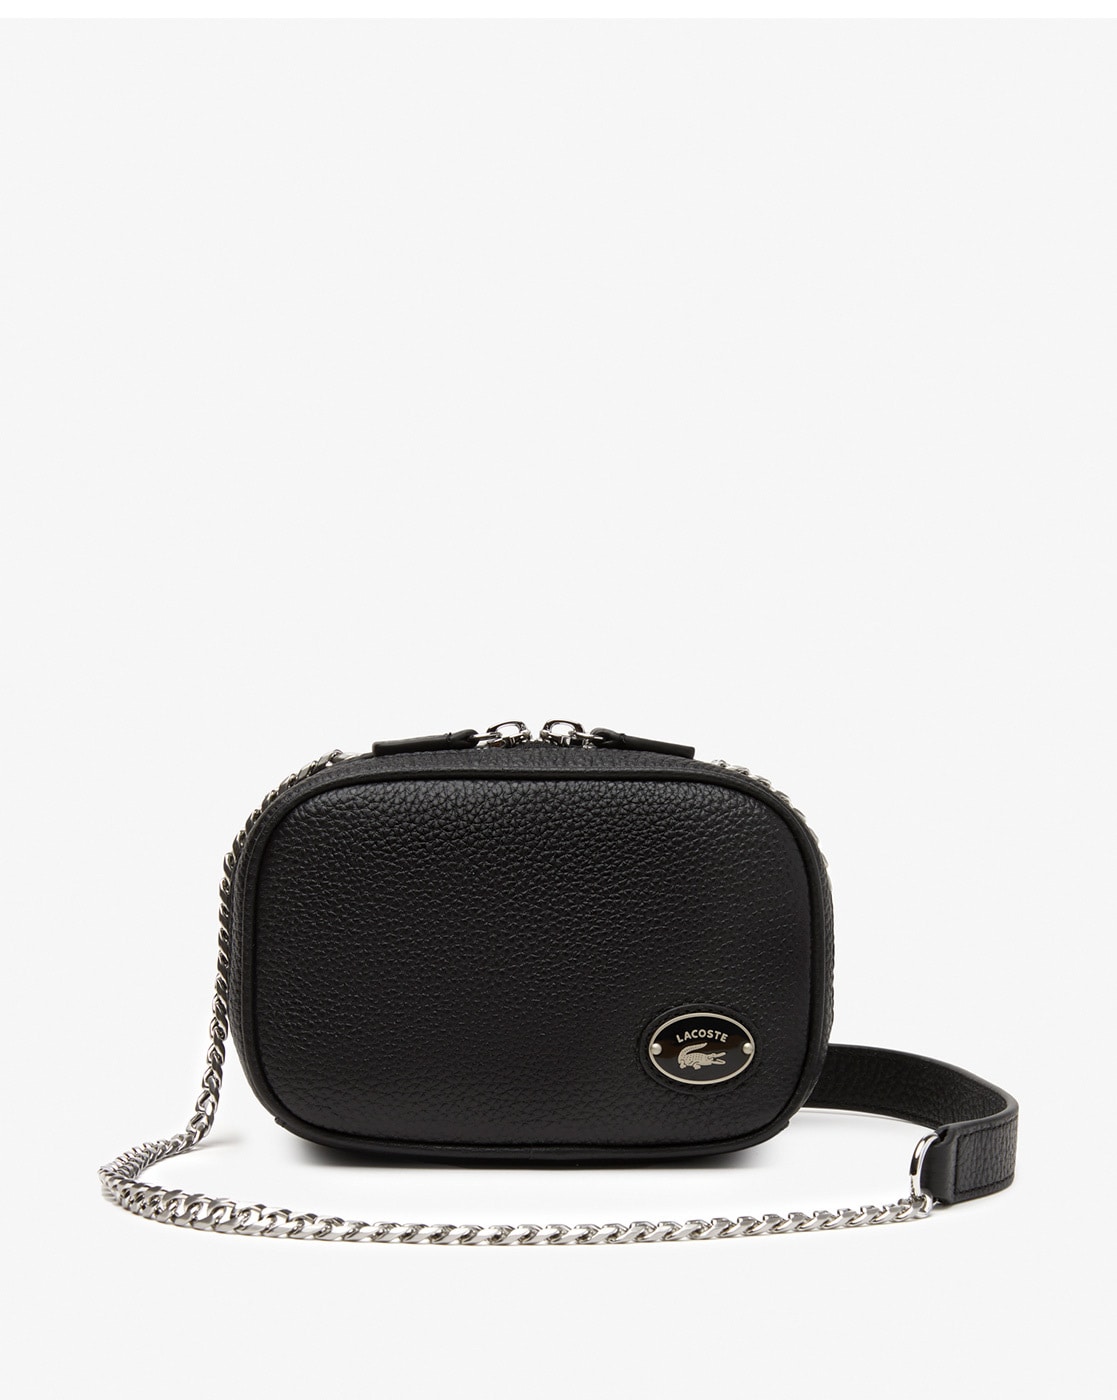 Lacoste Pvc Backpack - Black | Editorialist